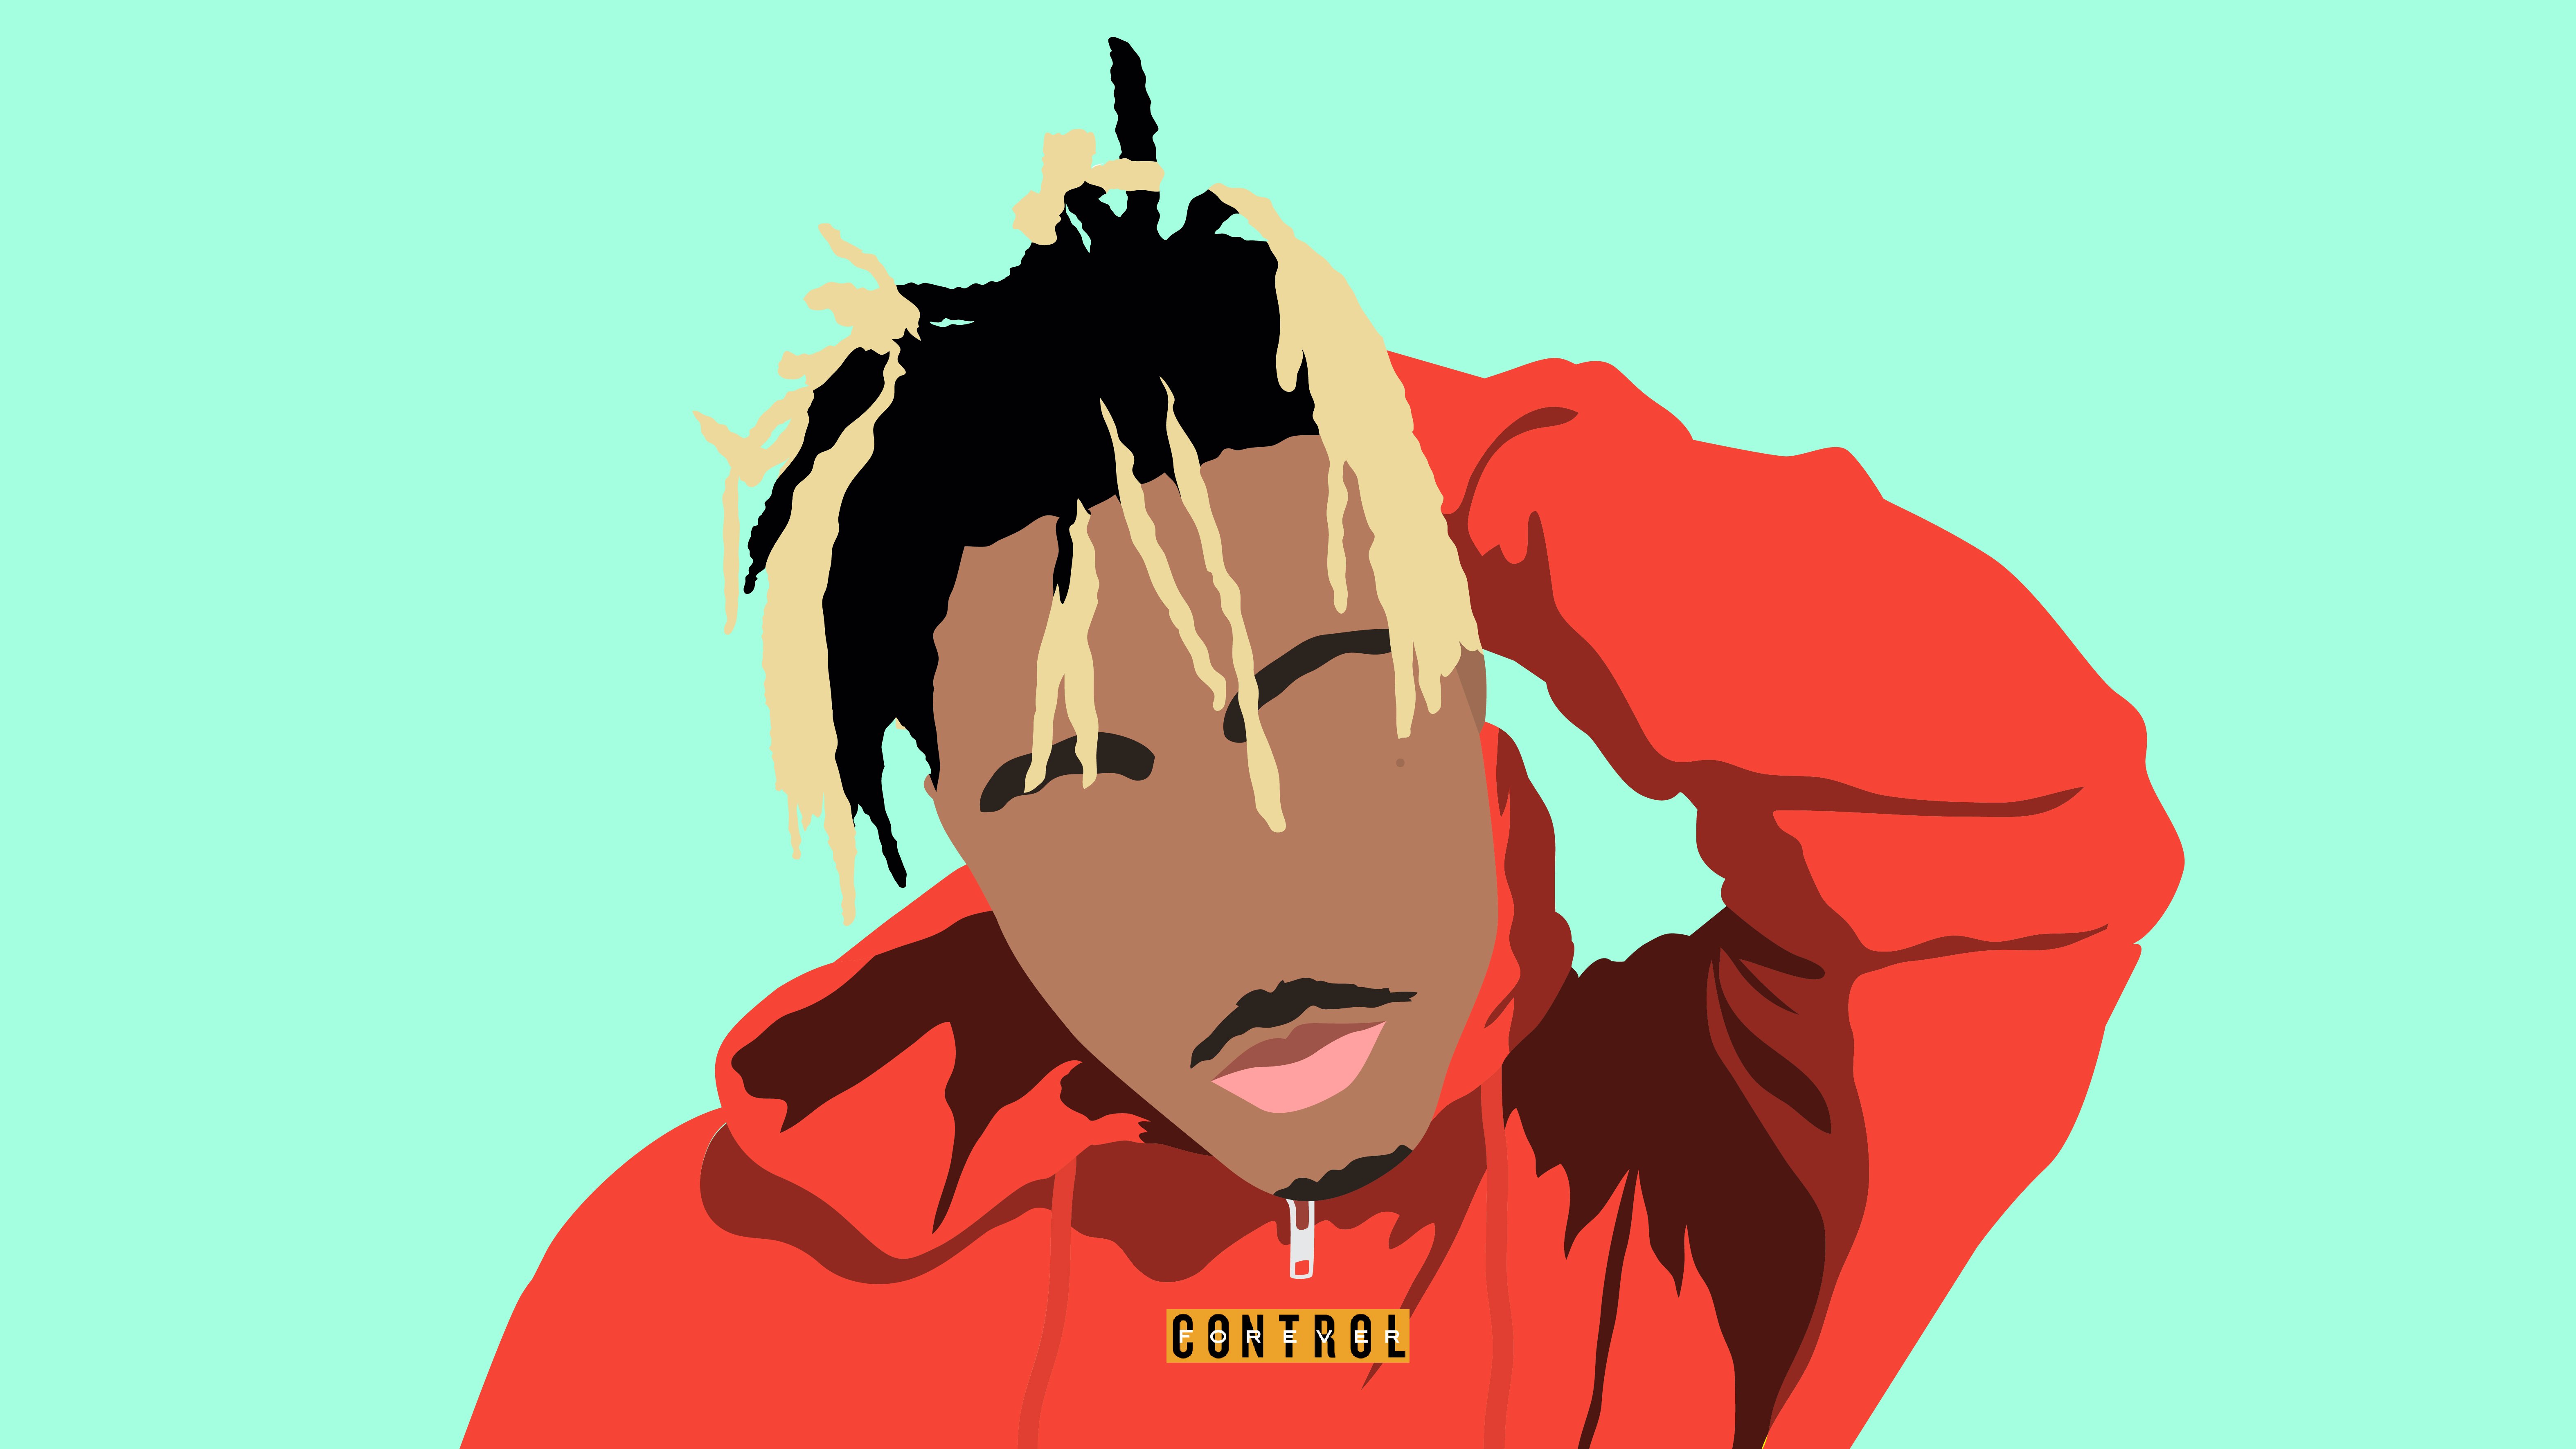 Download Juice Wrld Surrounded by His Artwork Wallpaper